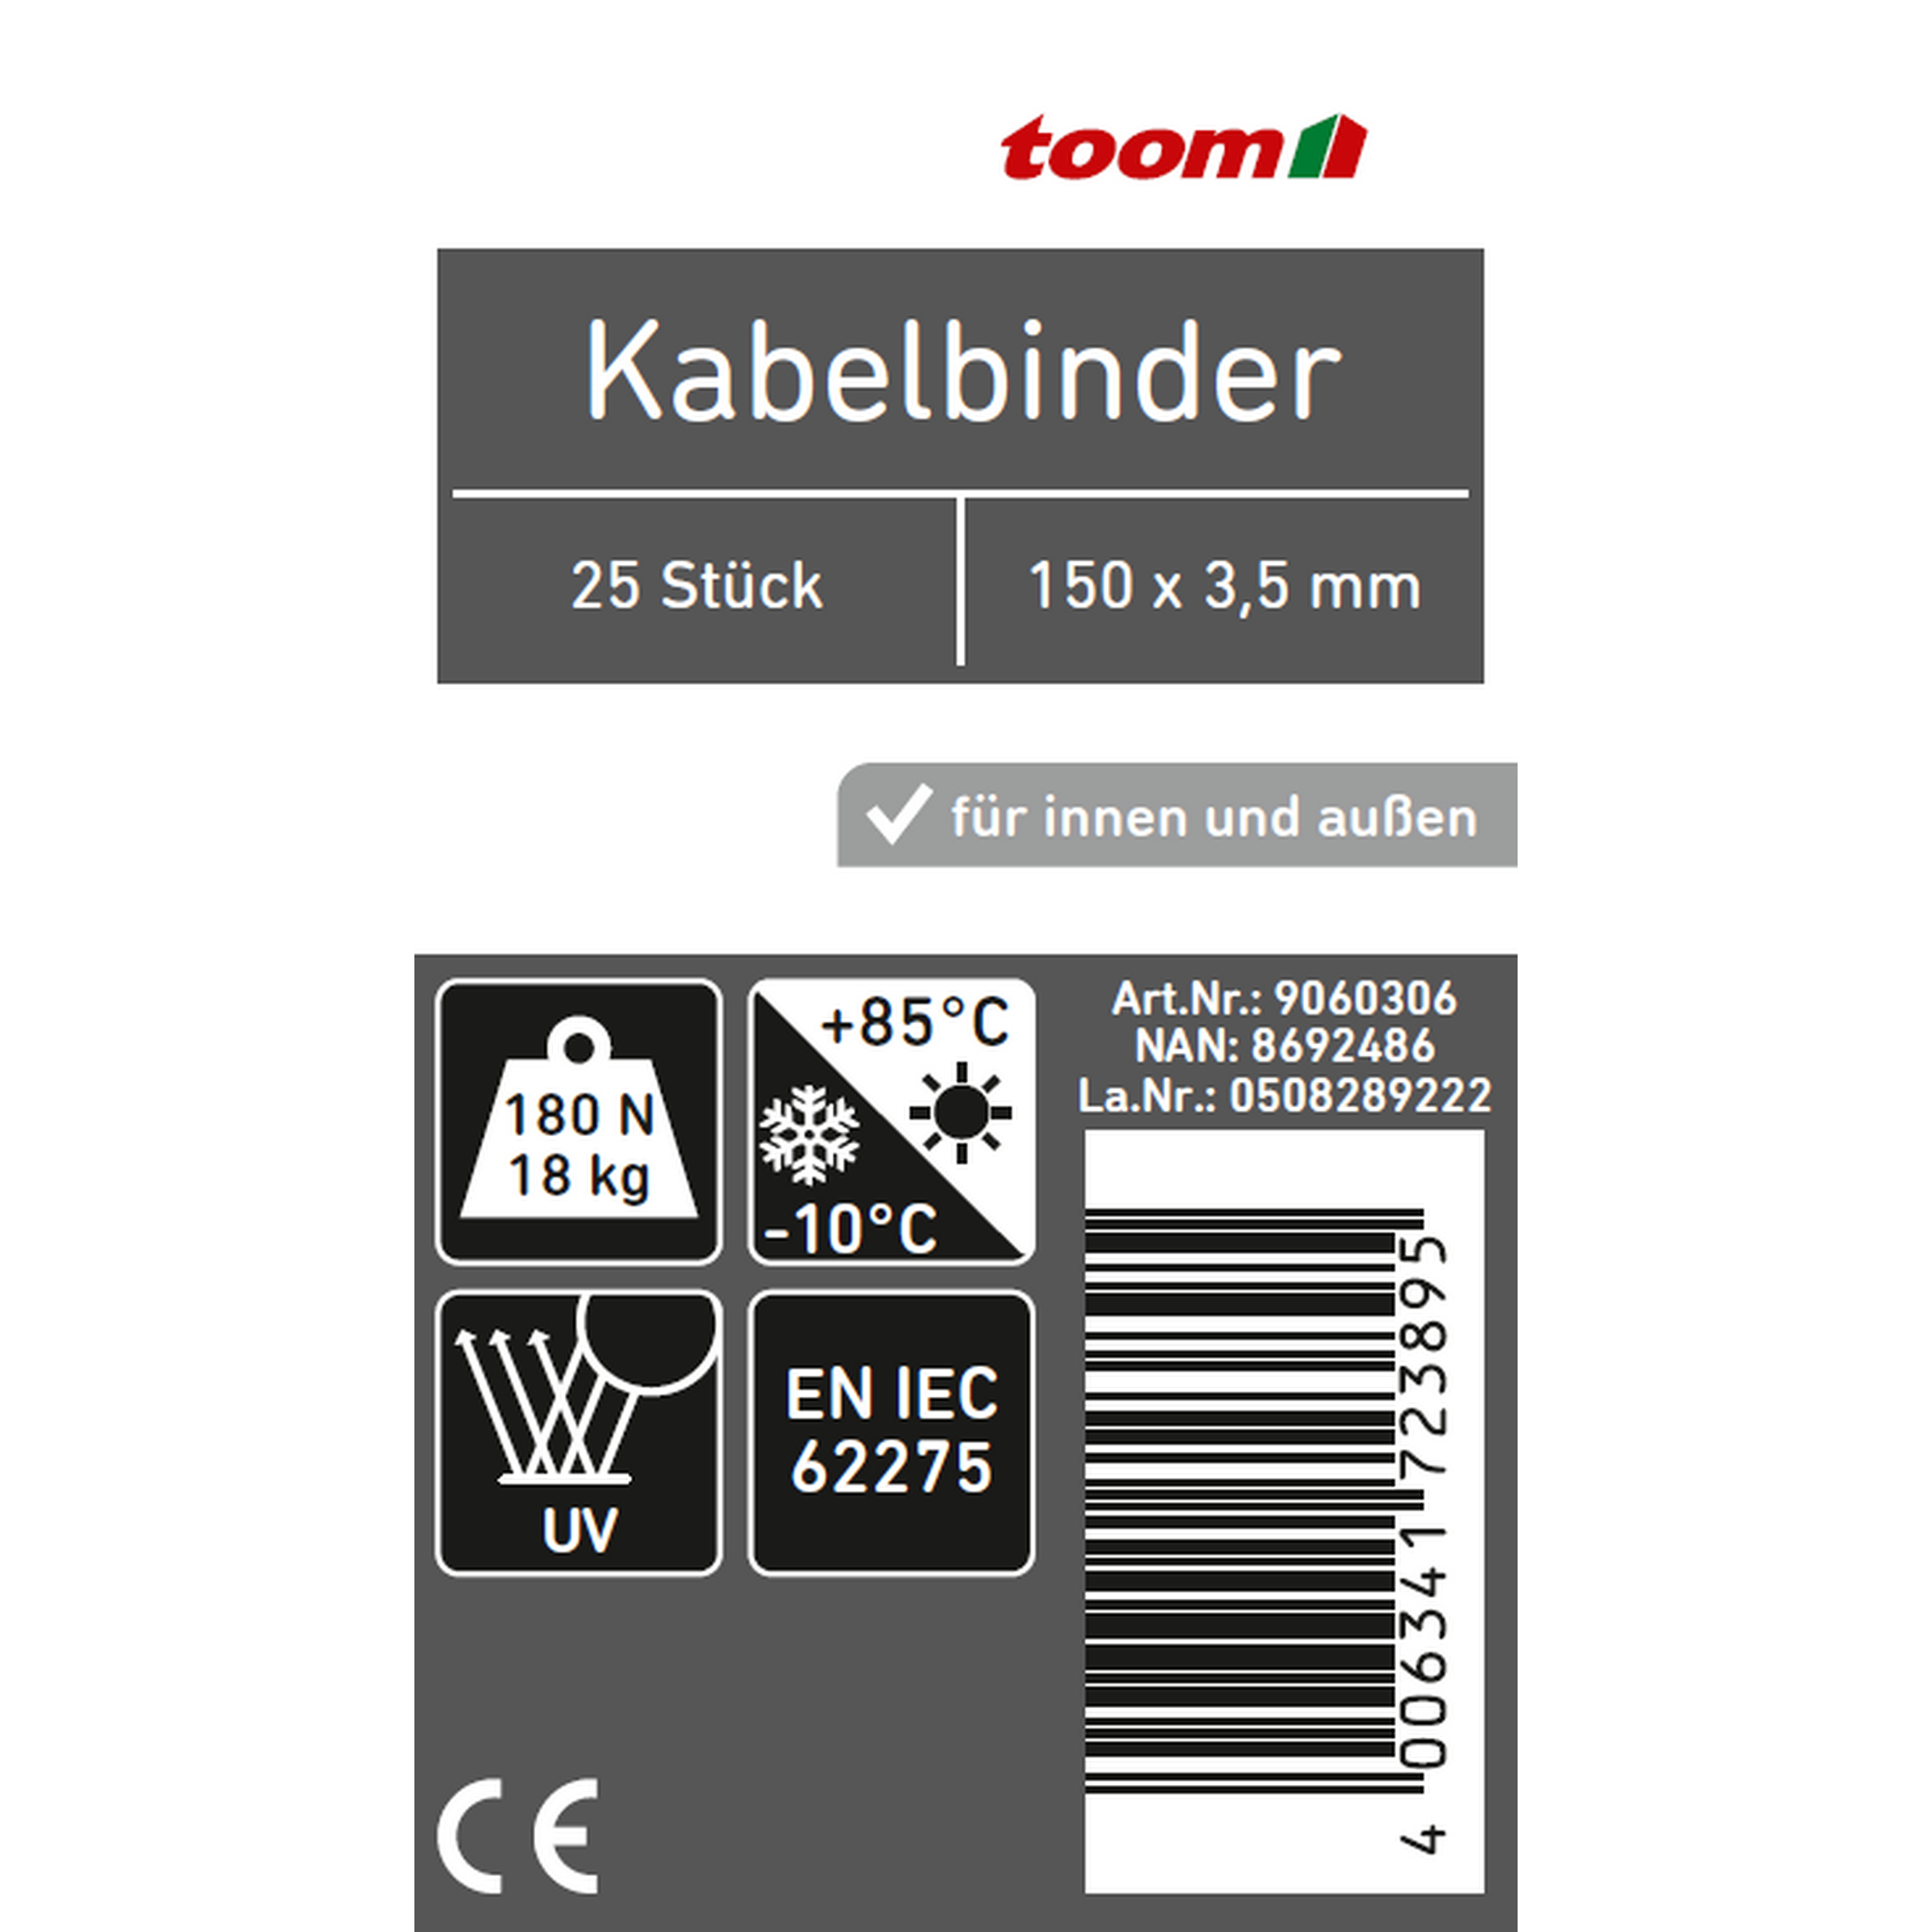 Kabelbinder weiß 3,5 x 150 mm 25 Stück + product picture